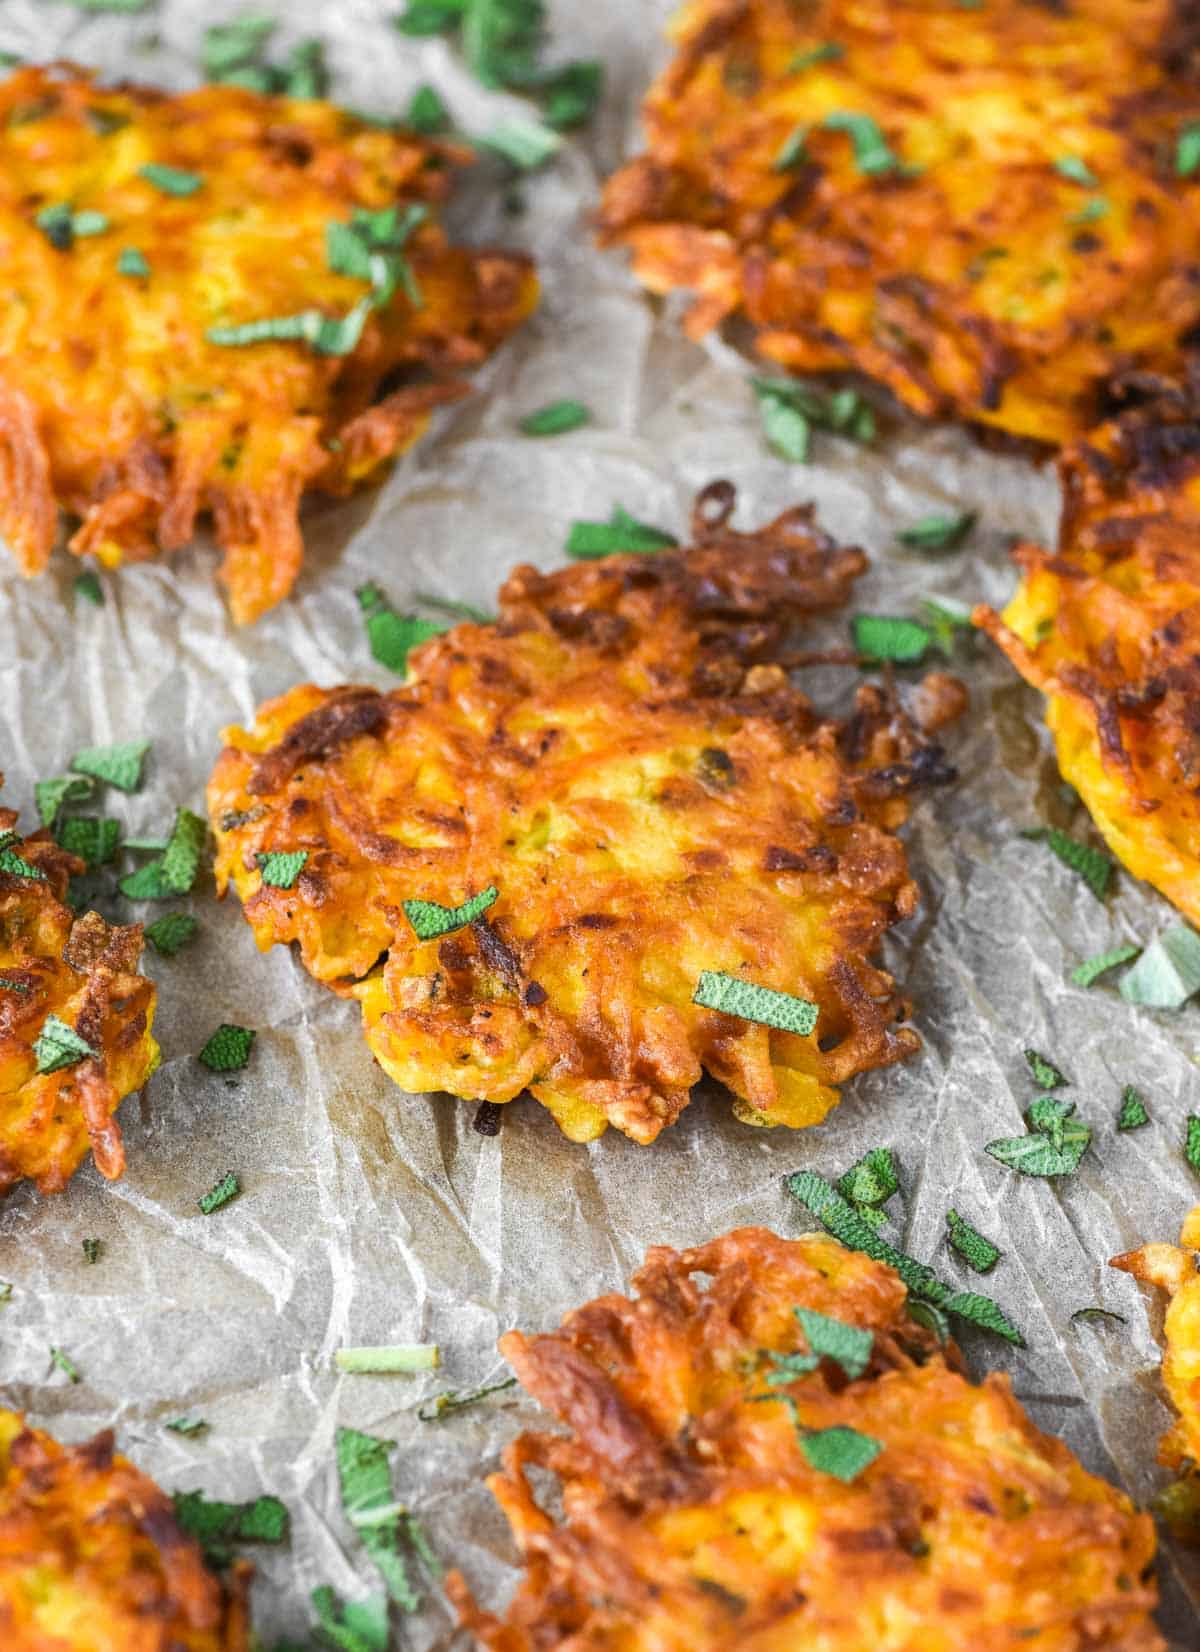 butternut squash fritters on parchment paper